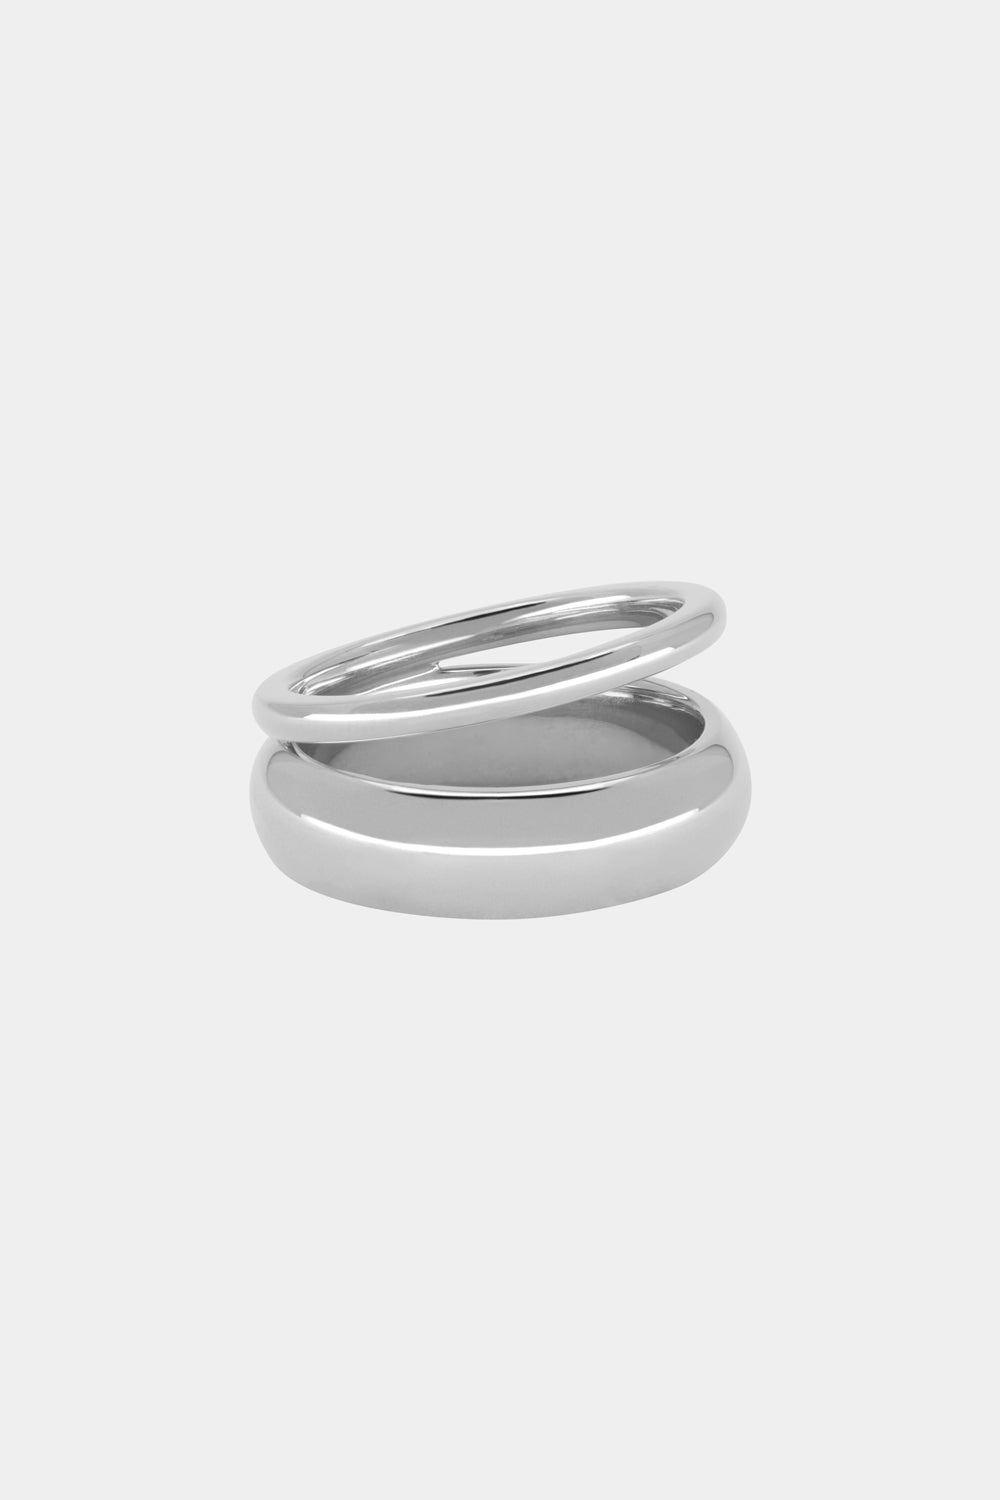 Double Band Sabine Ring | Silver or White Gold, More Options Available